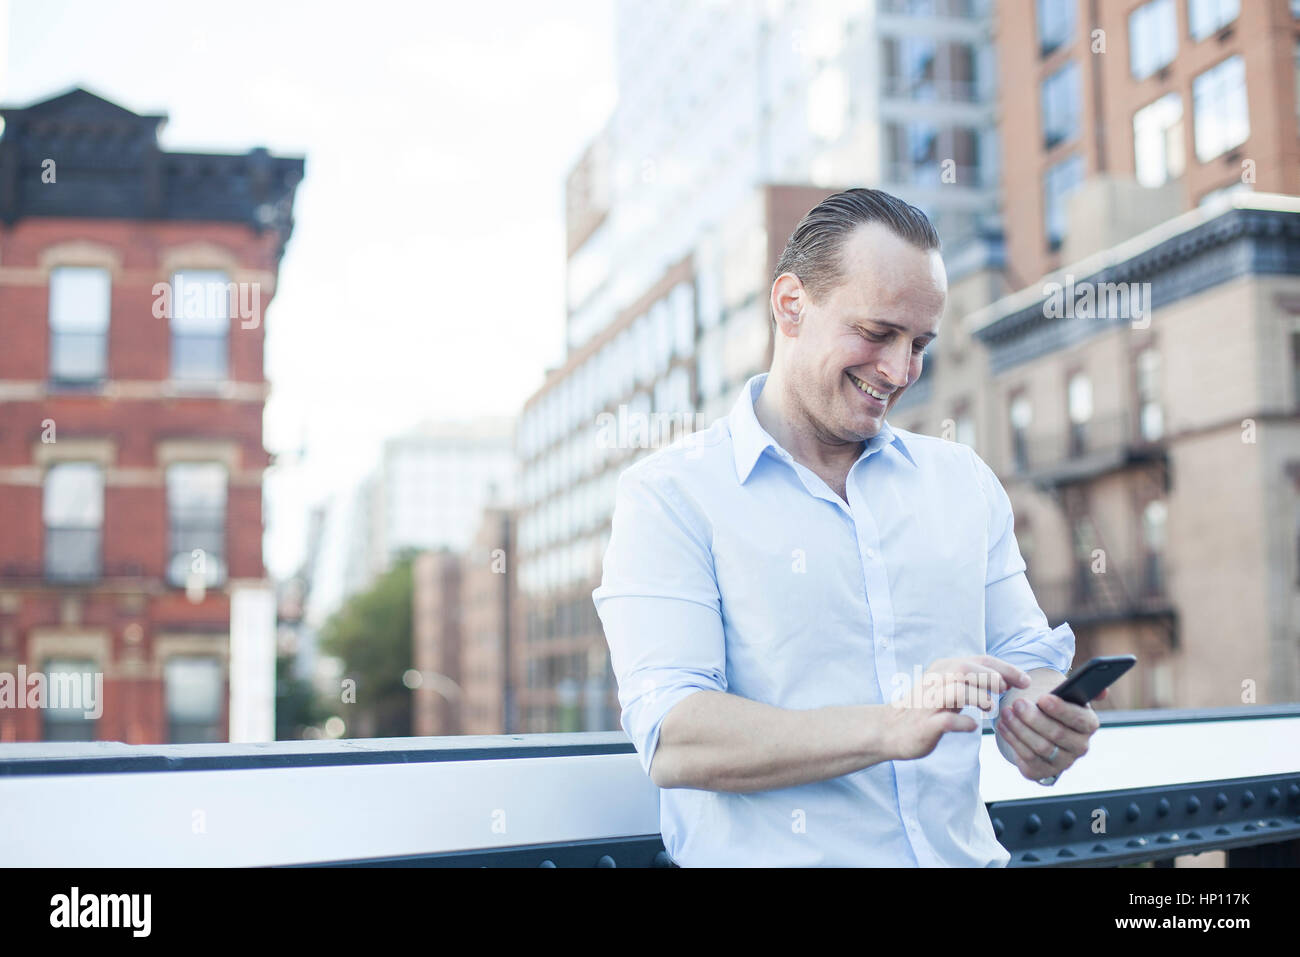 Man text messaging with smartphone Stock Photo